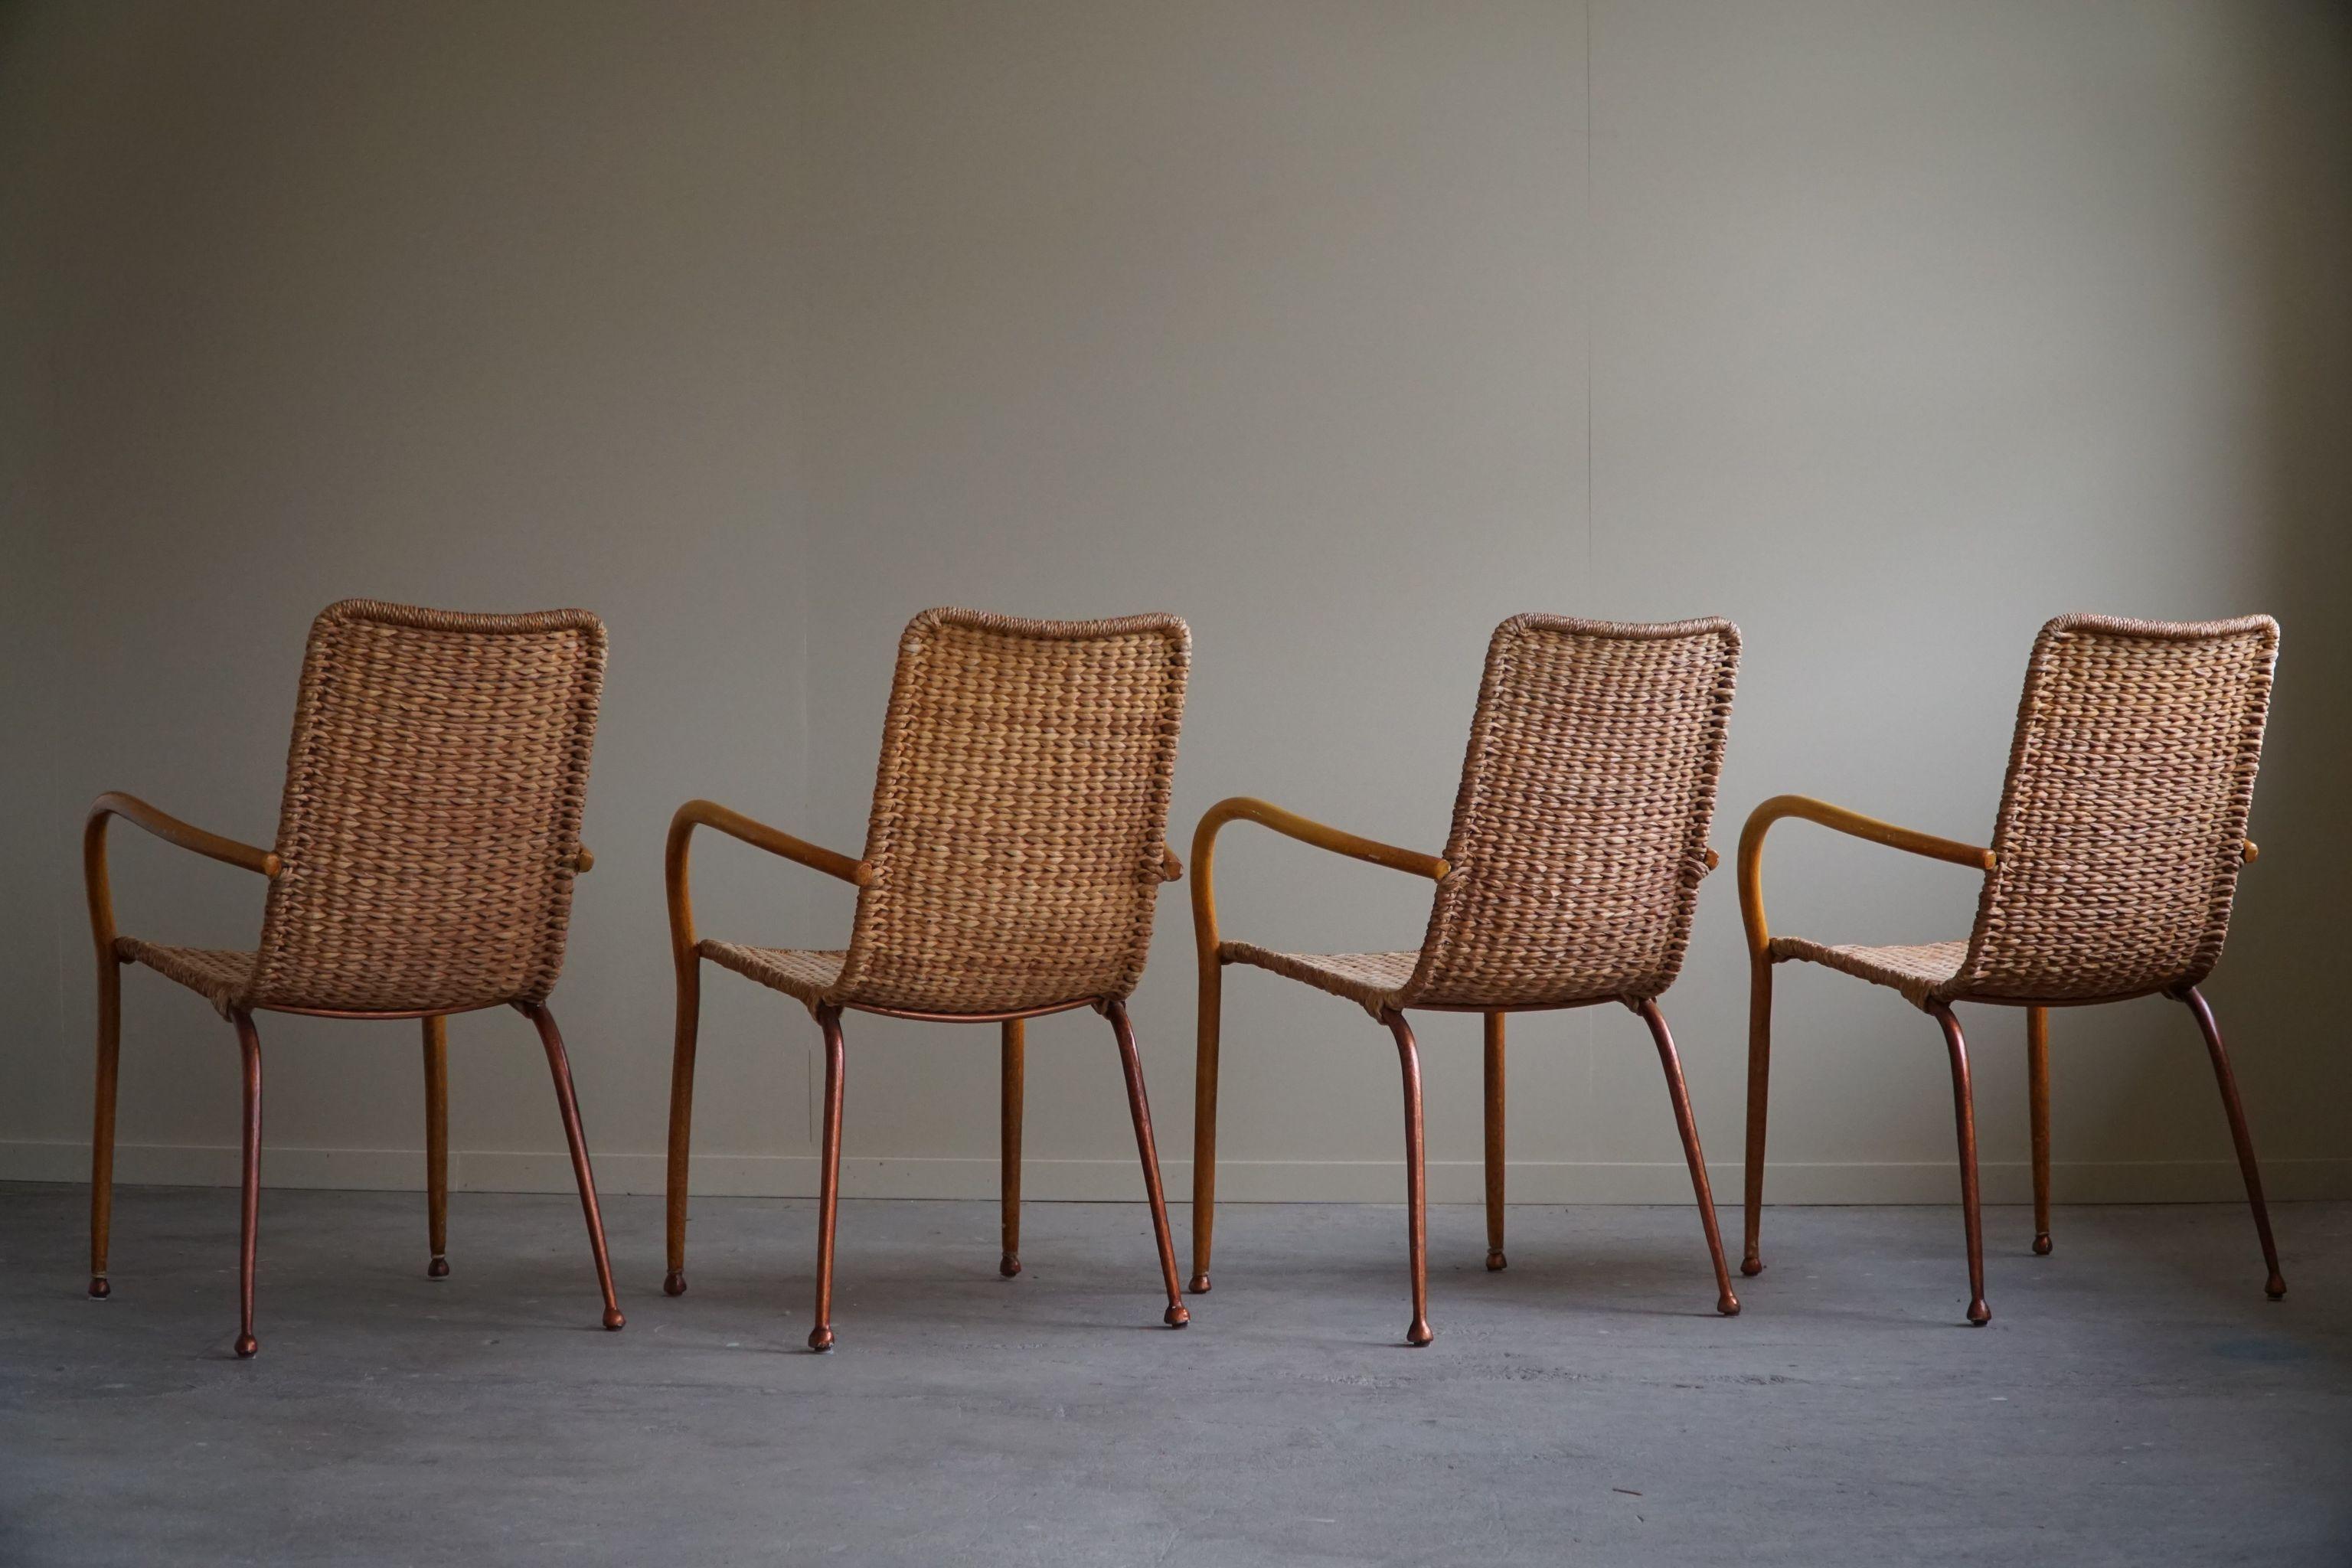 Set of 4 Italian Vintage Armchairs in Wicker & Birch, Mid-Century Modern, 1950 In Good Condition For Sale In Odense, DK